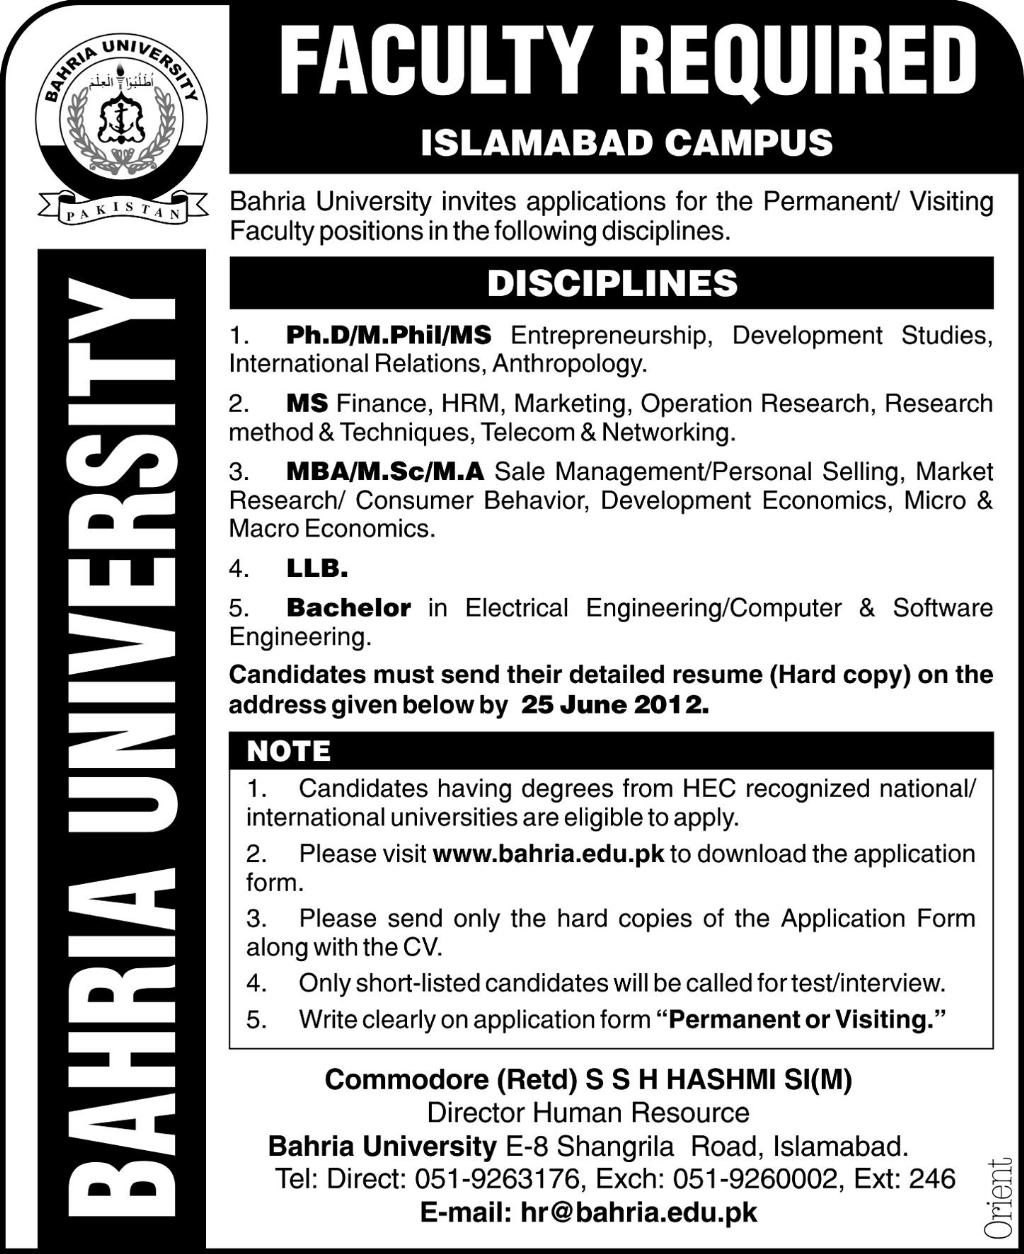 Bahria University Requires Permanent/ Visiting Faculty